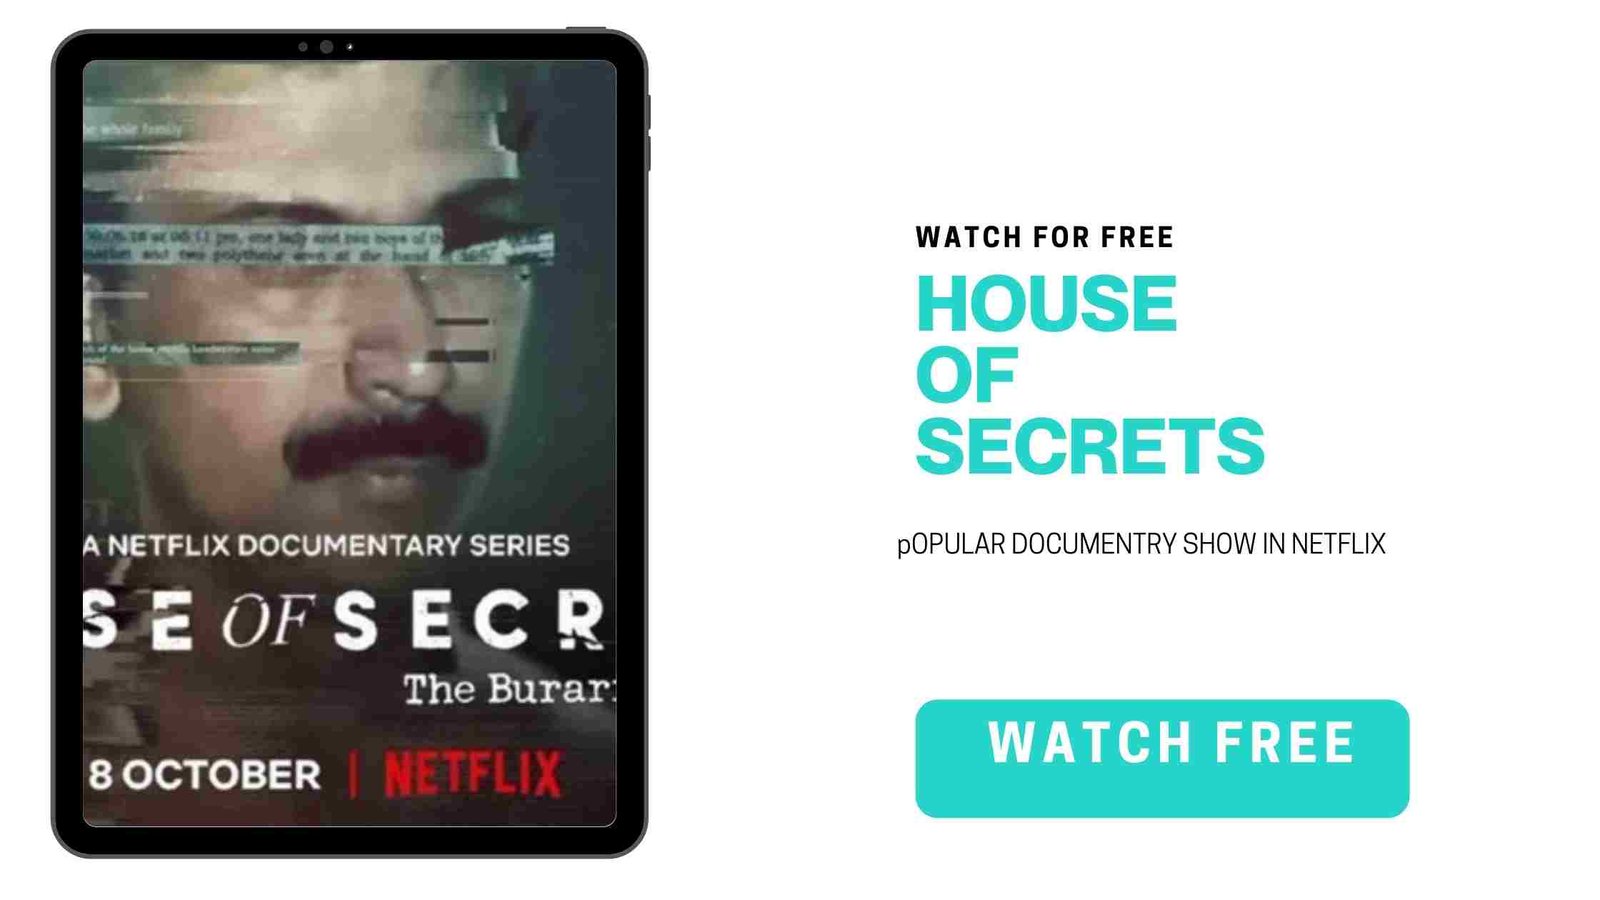 people are using this method to watch house pf secrets for free